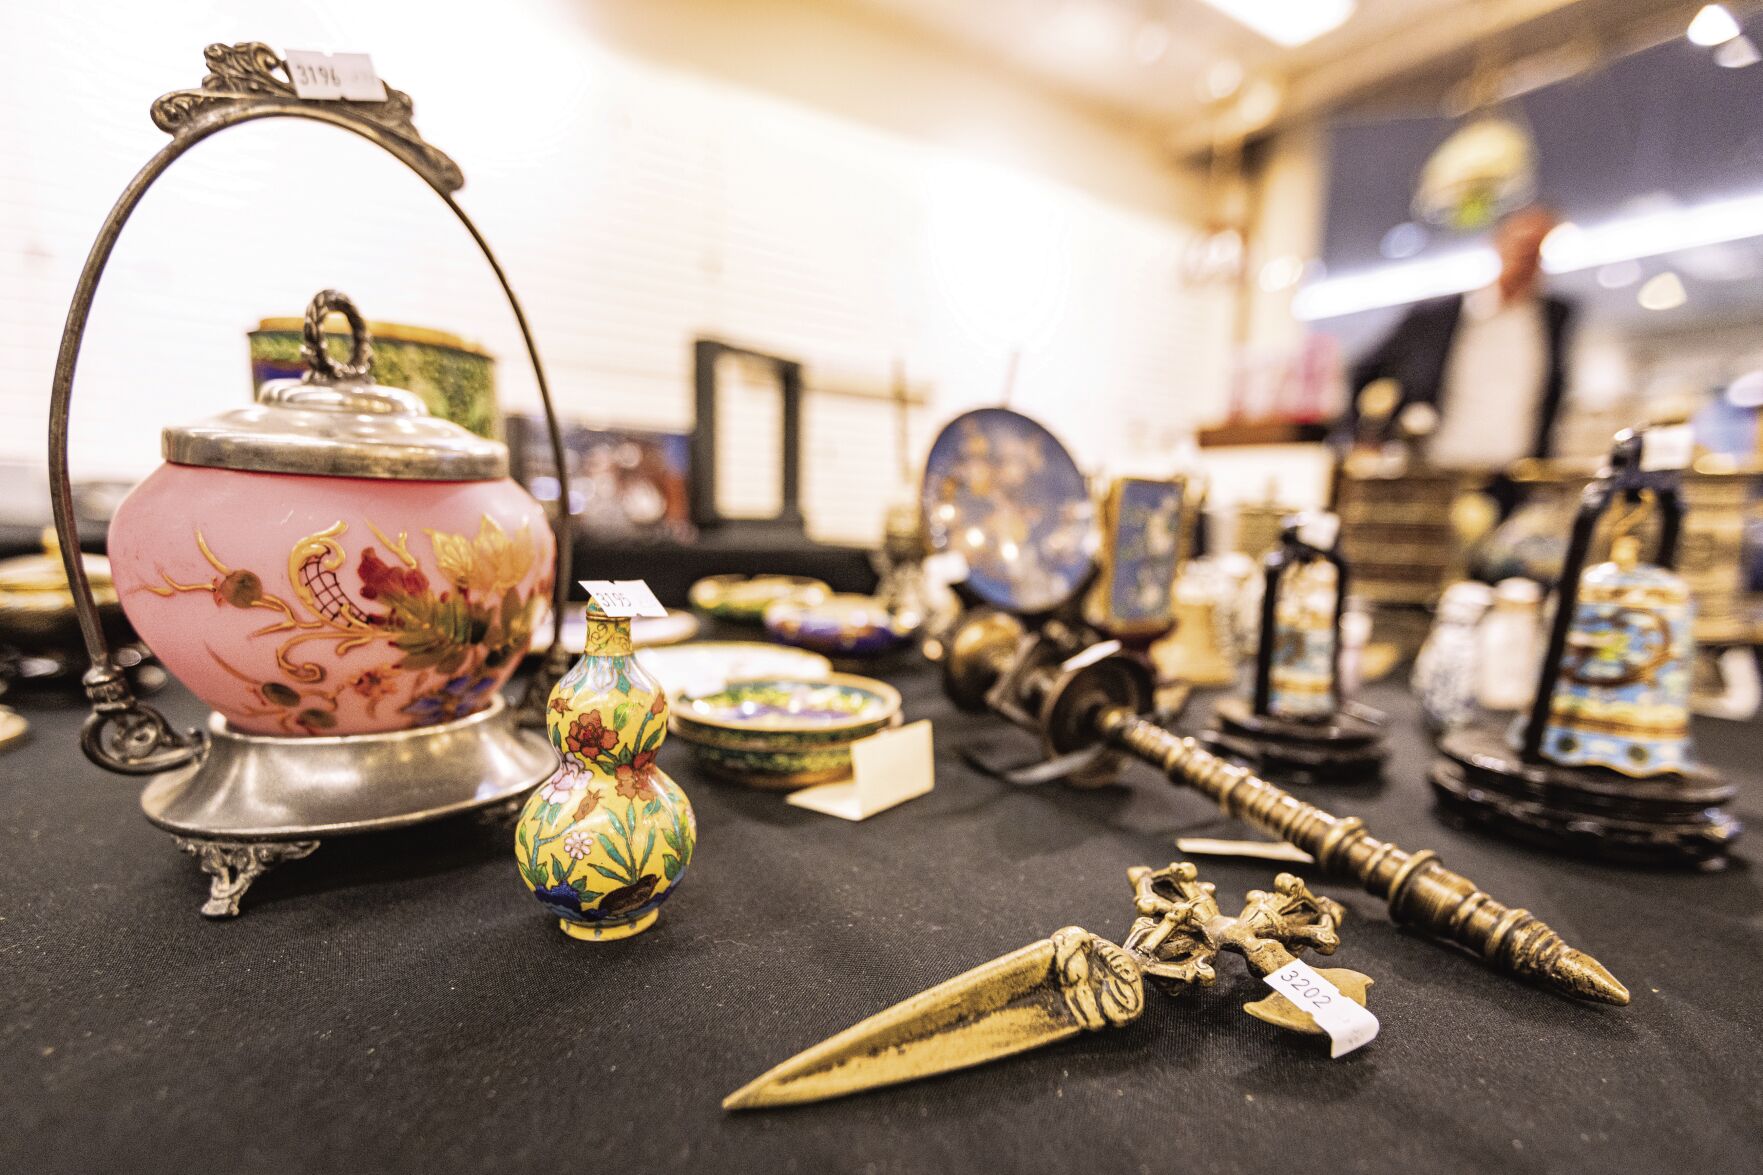 Various items up for auction are displayed at Bravo Auctioneers.    PHOTO CREDIT: Thomas Eckermann